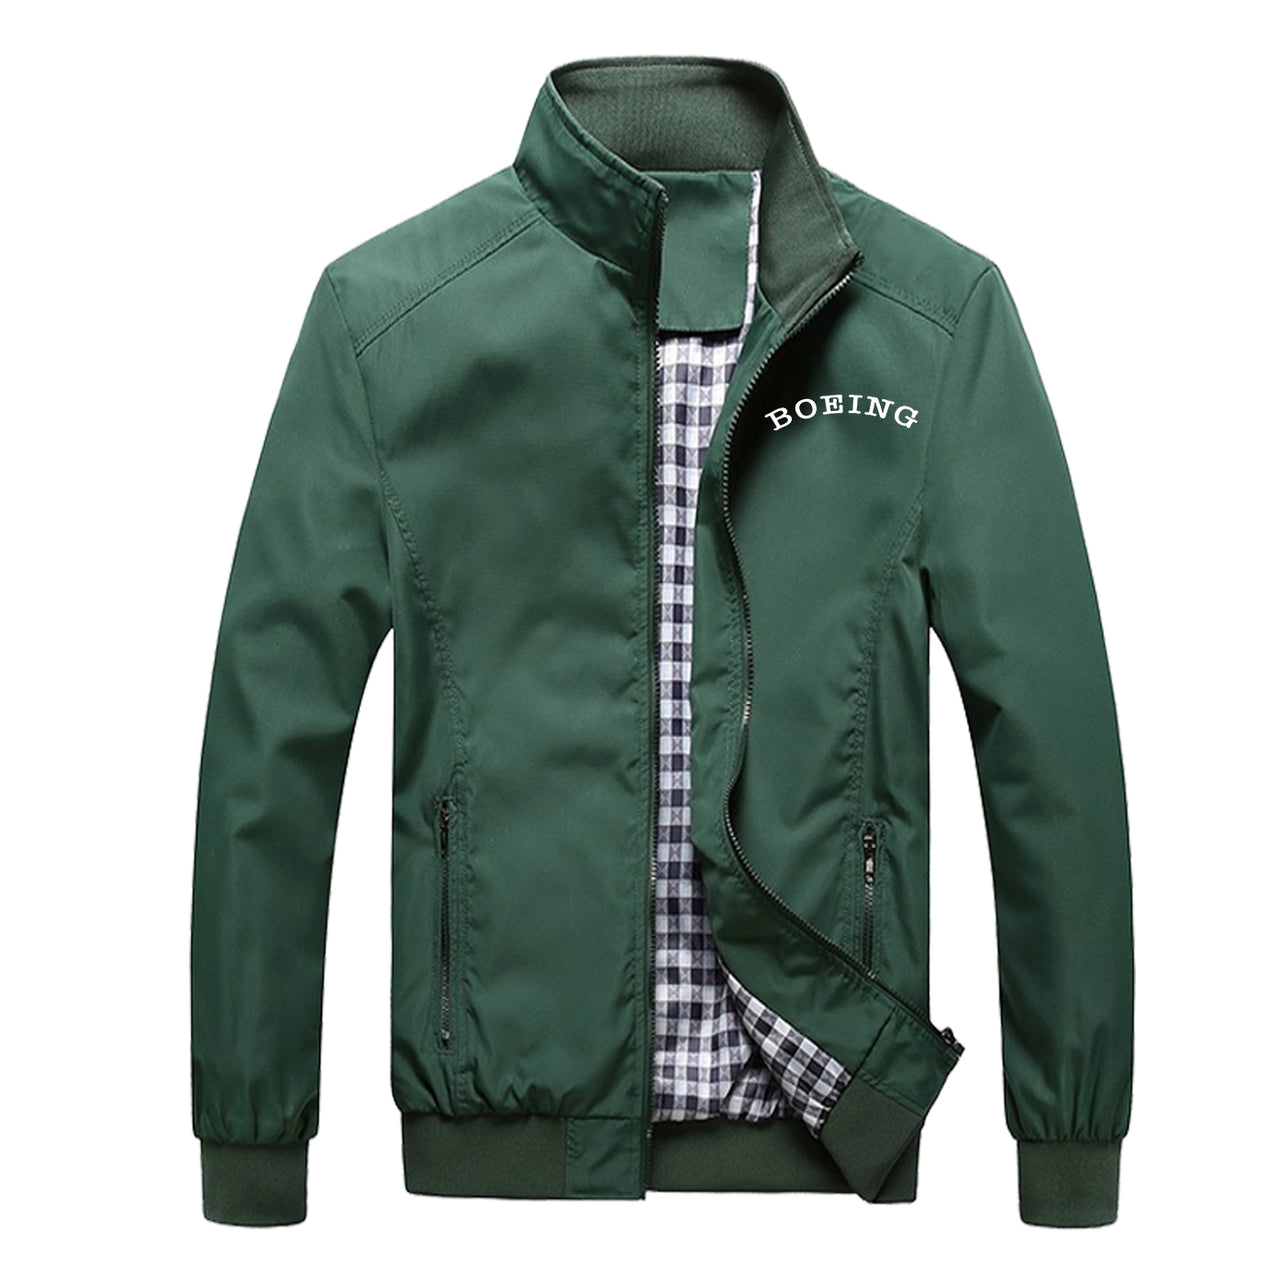 Special BOEING Text Designed Stylish Jackets